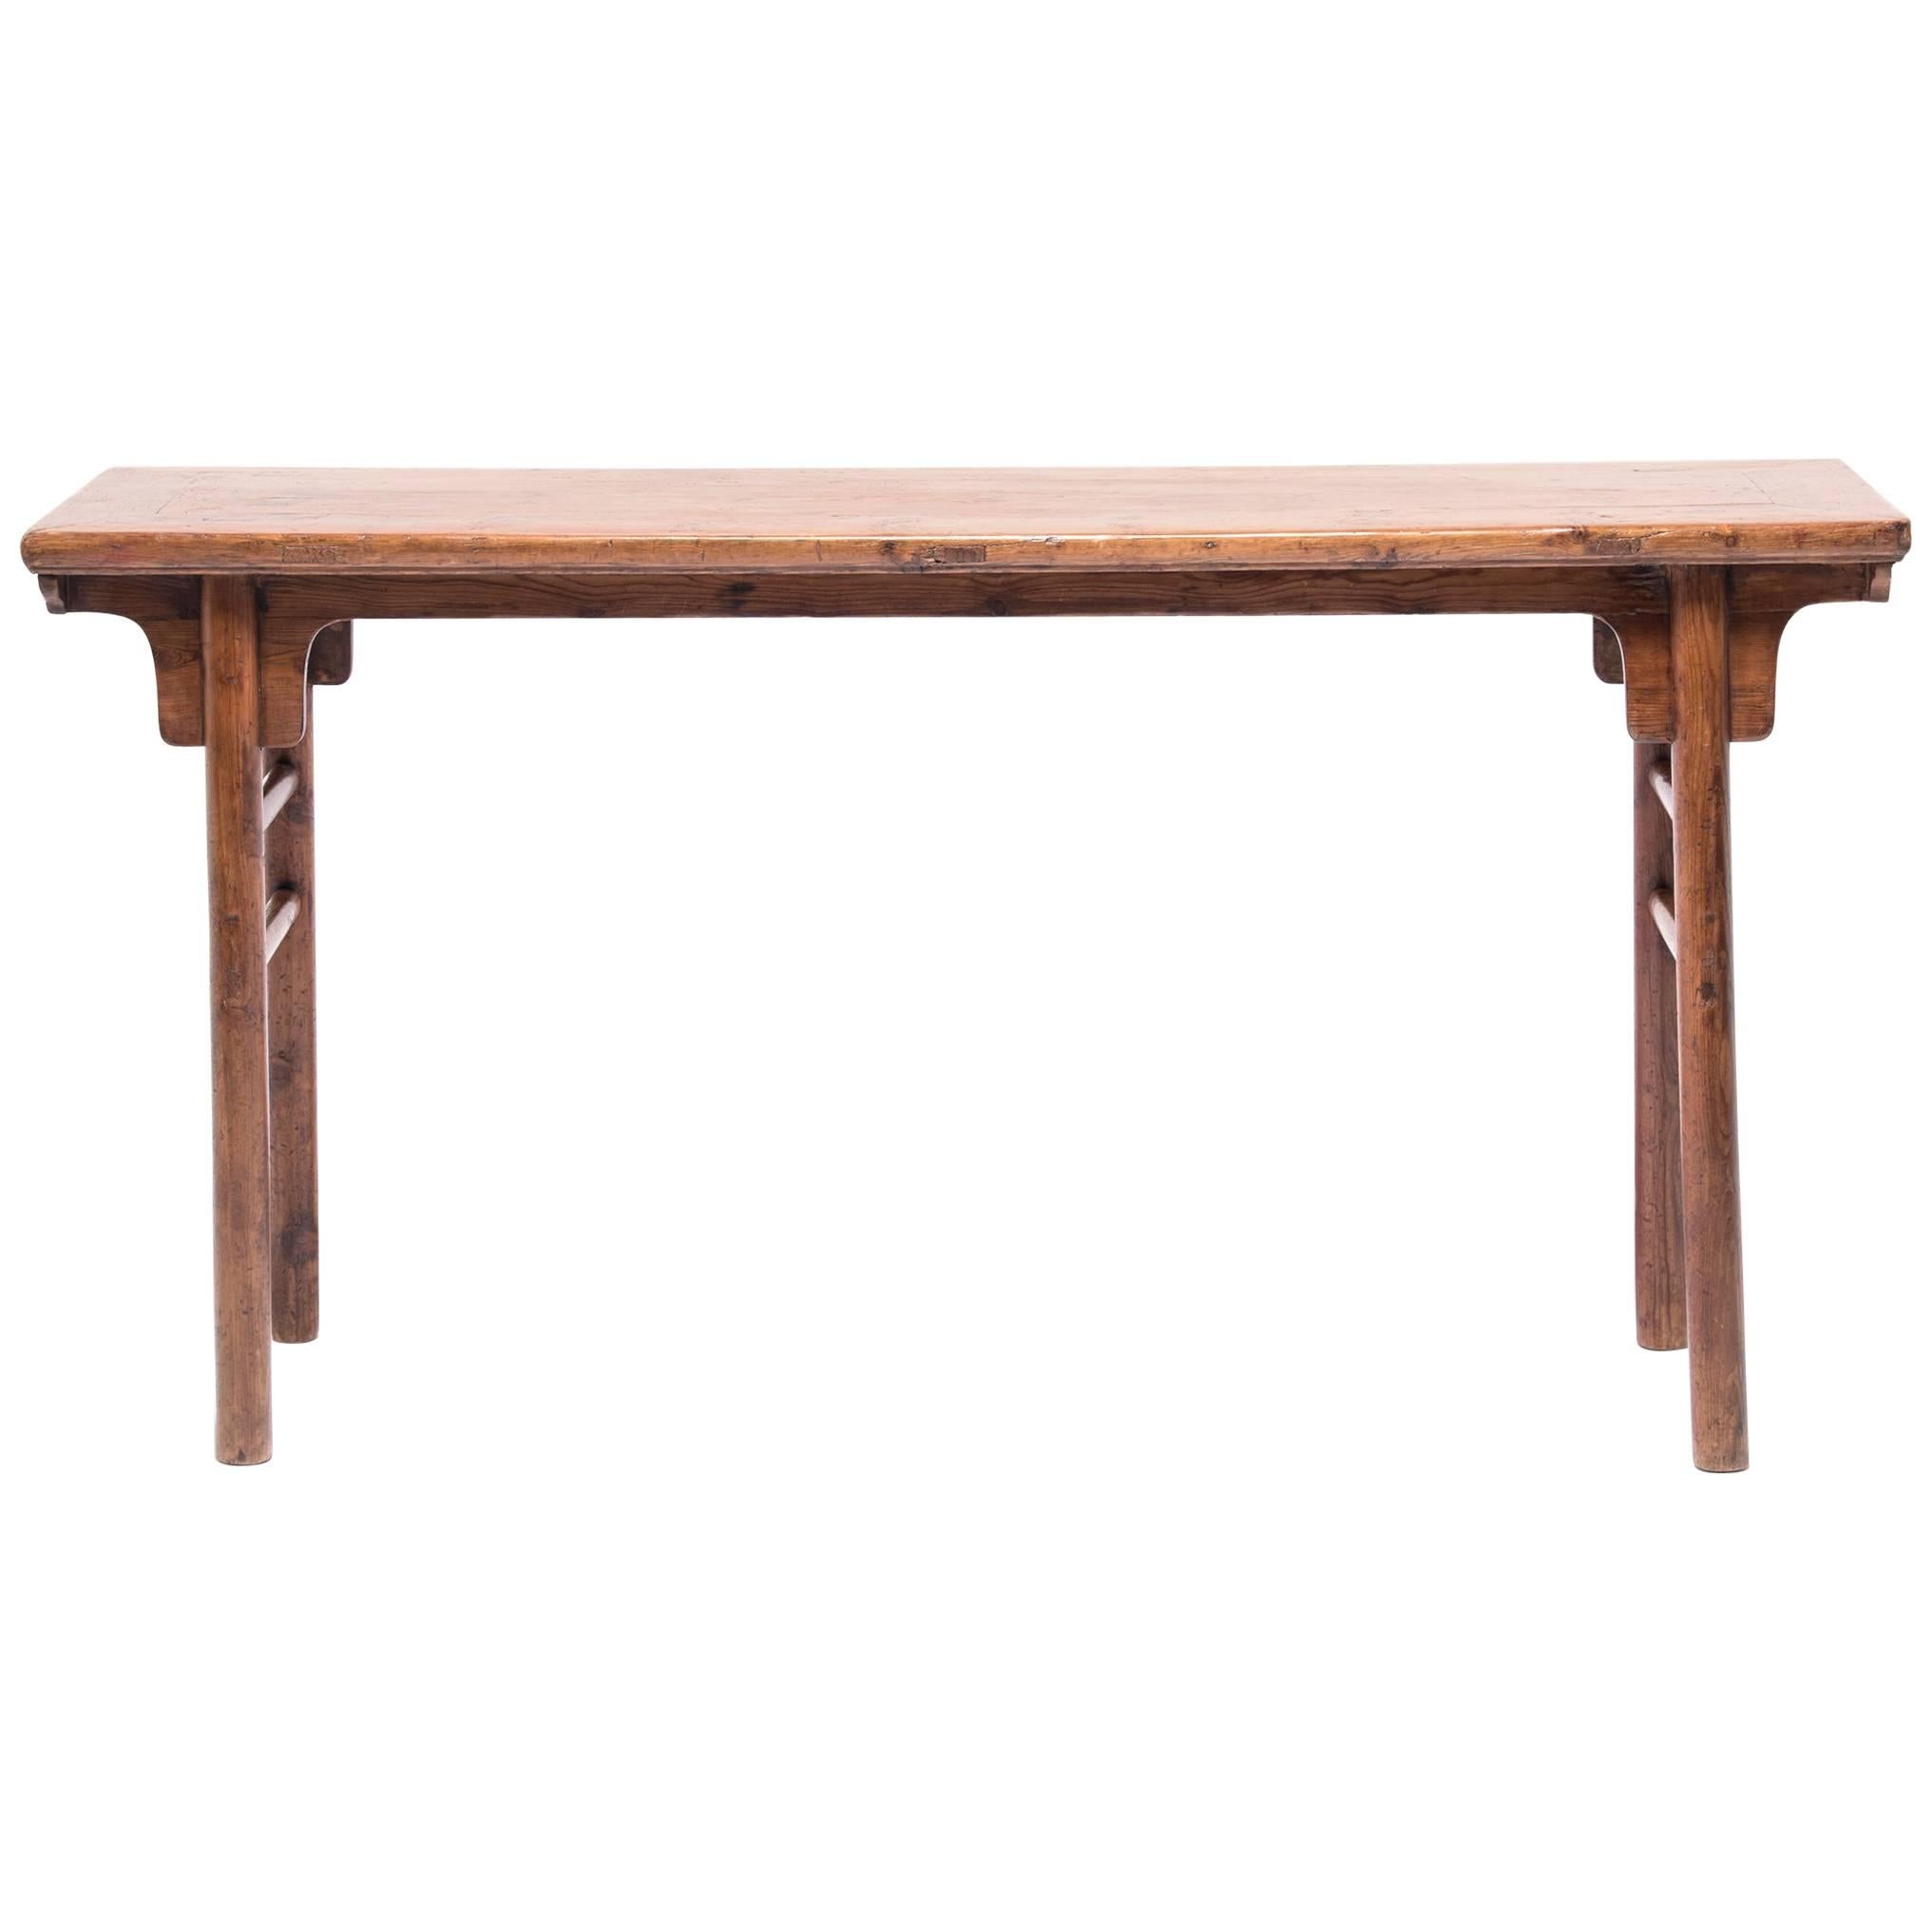 Chinese Altar Table in the Ming Manner